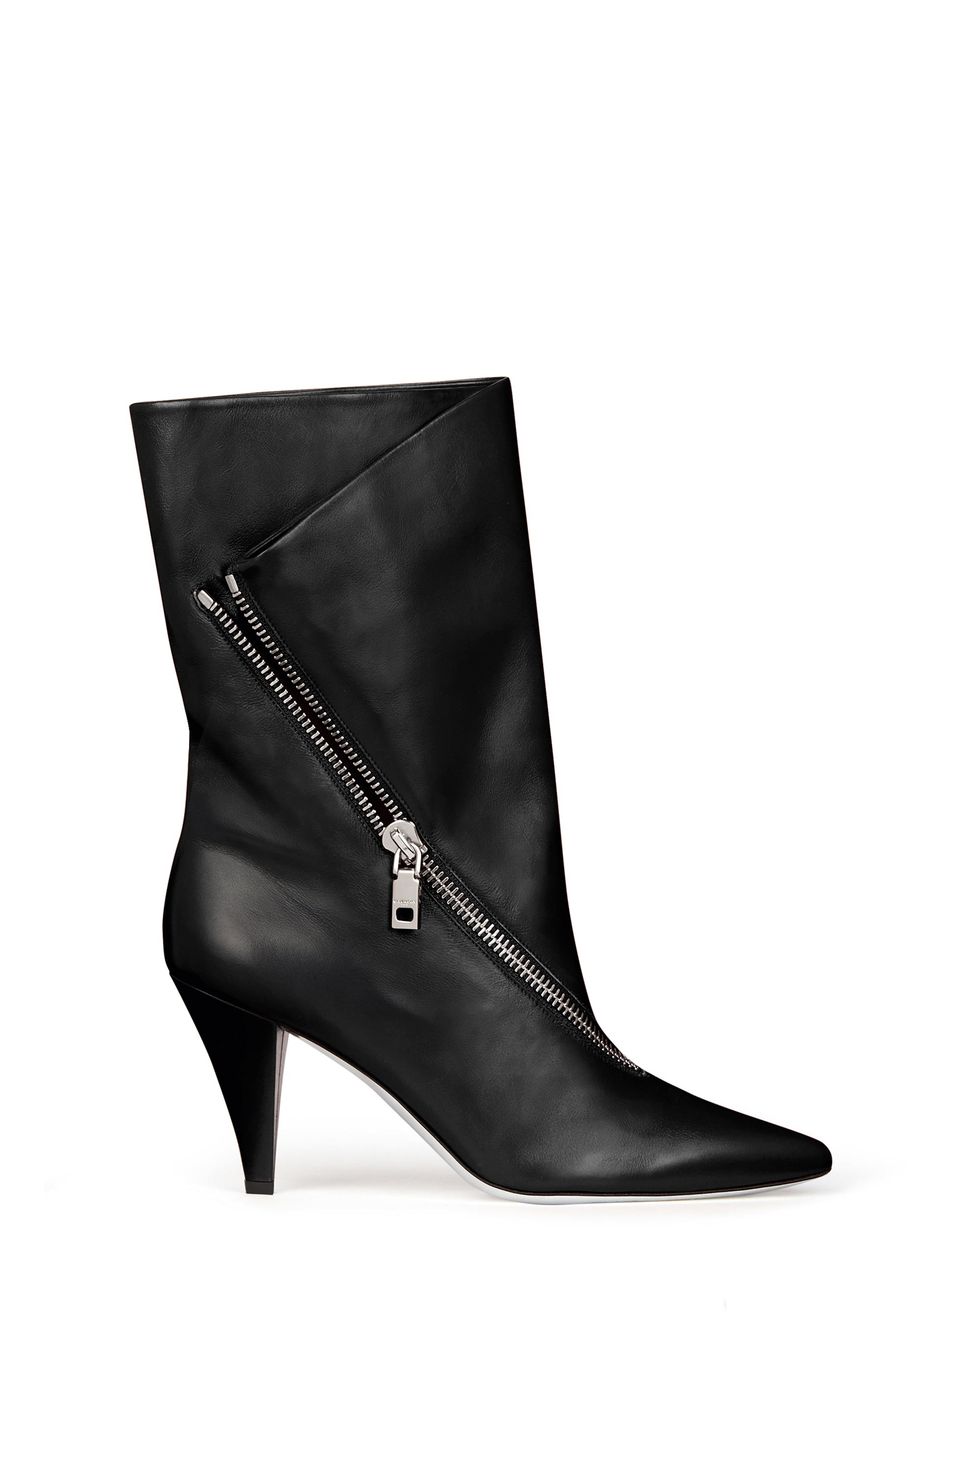 Footwear, High heels, Shoe, Boot, Leather, Knee-high boot, Fashion accessory, 